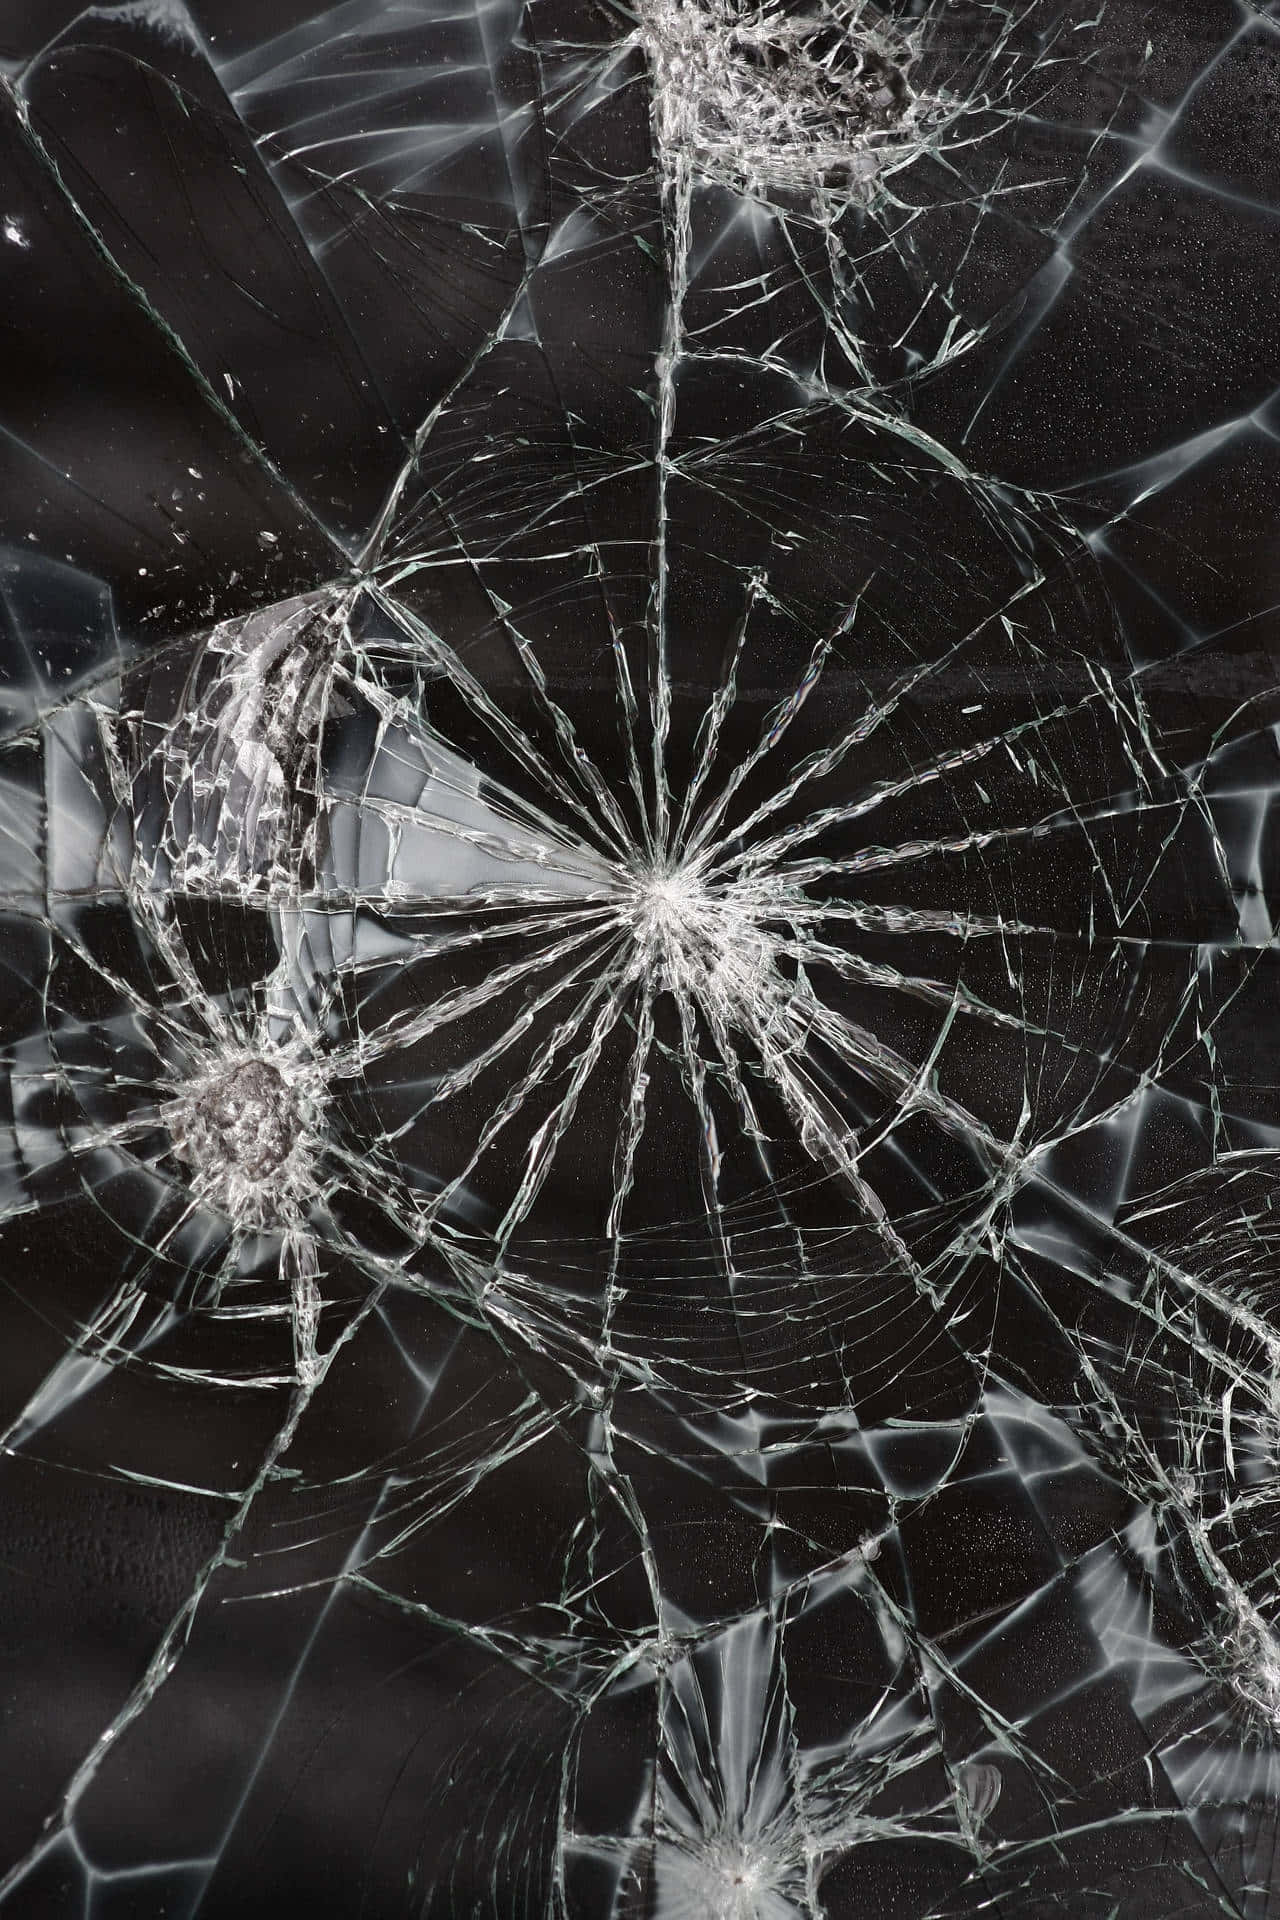 A Broken Windshield With A Lot Of Shattered Glass